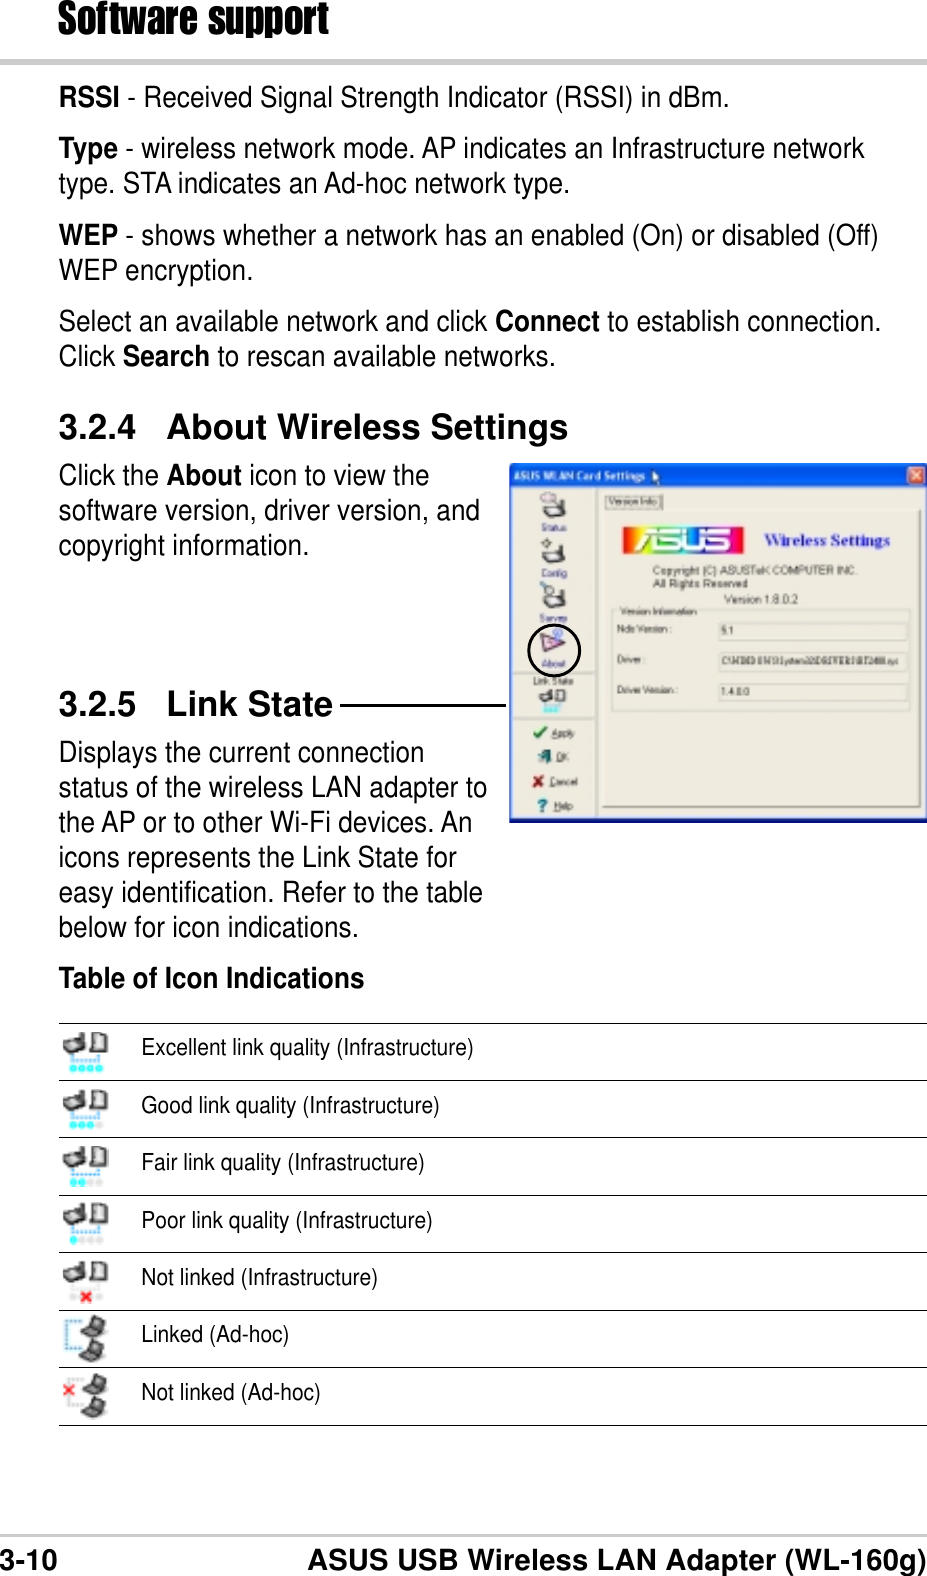 3-10 ASUS USB Wireless LAN Adapter (WL-160g)Software supportRSSI - Received Signal Strength Indicator (RSSI) in dBm.Type - wireless network mode. AP indicates an Infrastructure networktype. STA indicates an Ad-hoc network type.WEP - shows whether a network has an enabled (On) or disabled (Off)WEP encryption.Select an available network and click Connect to establish connection.Click Search to rescan available networks.3.2.4 About Wireless SettingsClick the About icon to view thesoftware version, driver version, andcopyright information.3.2.5 Link StateDisplays the current connectionstatus of the wireless LAN adapter tothe AP or to other Wi-Fi devices. Anicons represents the Link State foreasy identification. Refer to the tablebelow for icon indications.Table of Icon IndicationsExcellent link quality (Infrastructure)Good link quality (Infrastructure)Fair link quality (Infrastructure)Poor link quality (Infrastructure)Not linked (Infrastructure)Linked (Ad-hoc)Not linked (Ad-hoc)